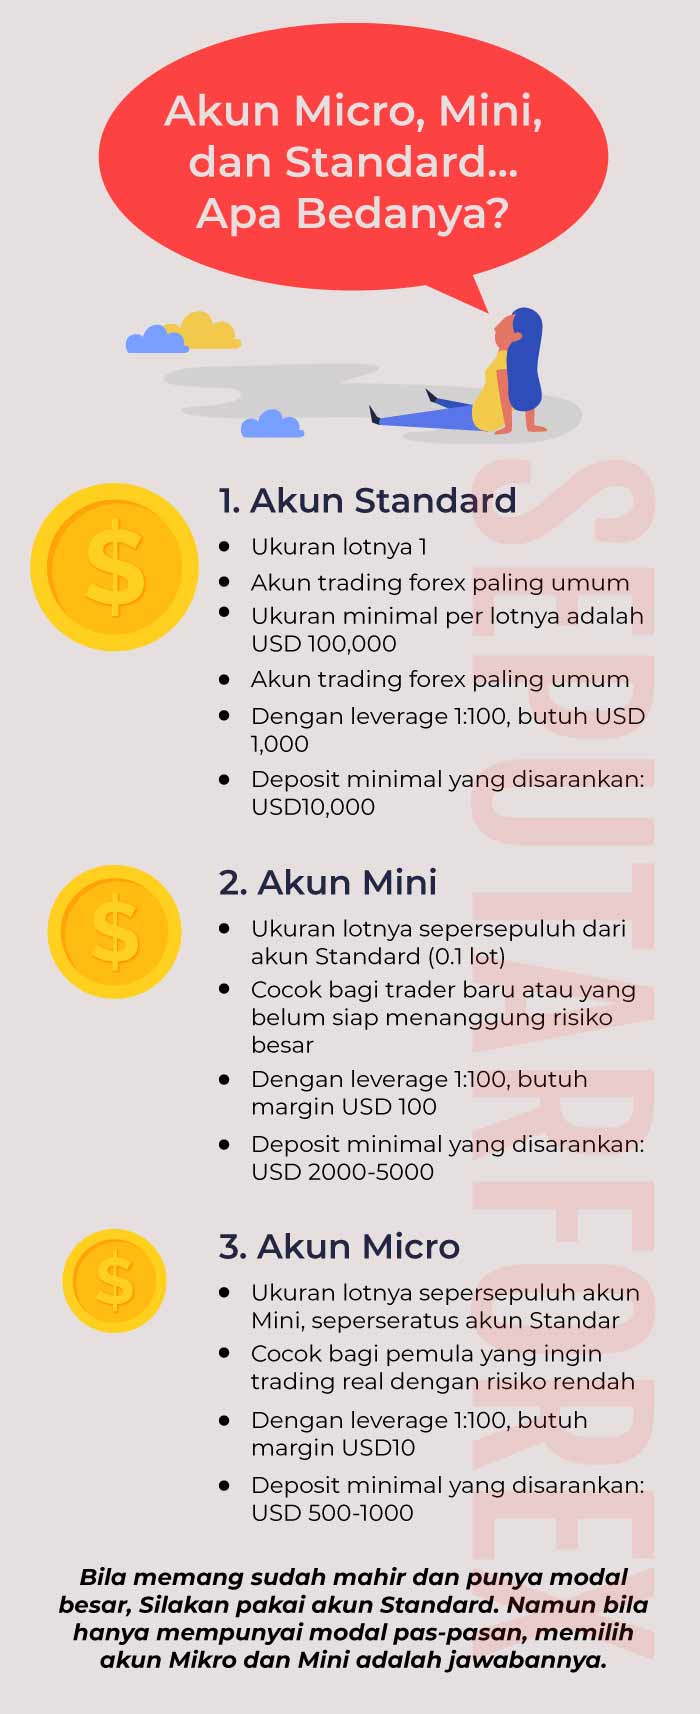 Minimal transaksi forex 2018 march cryptocurrency